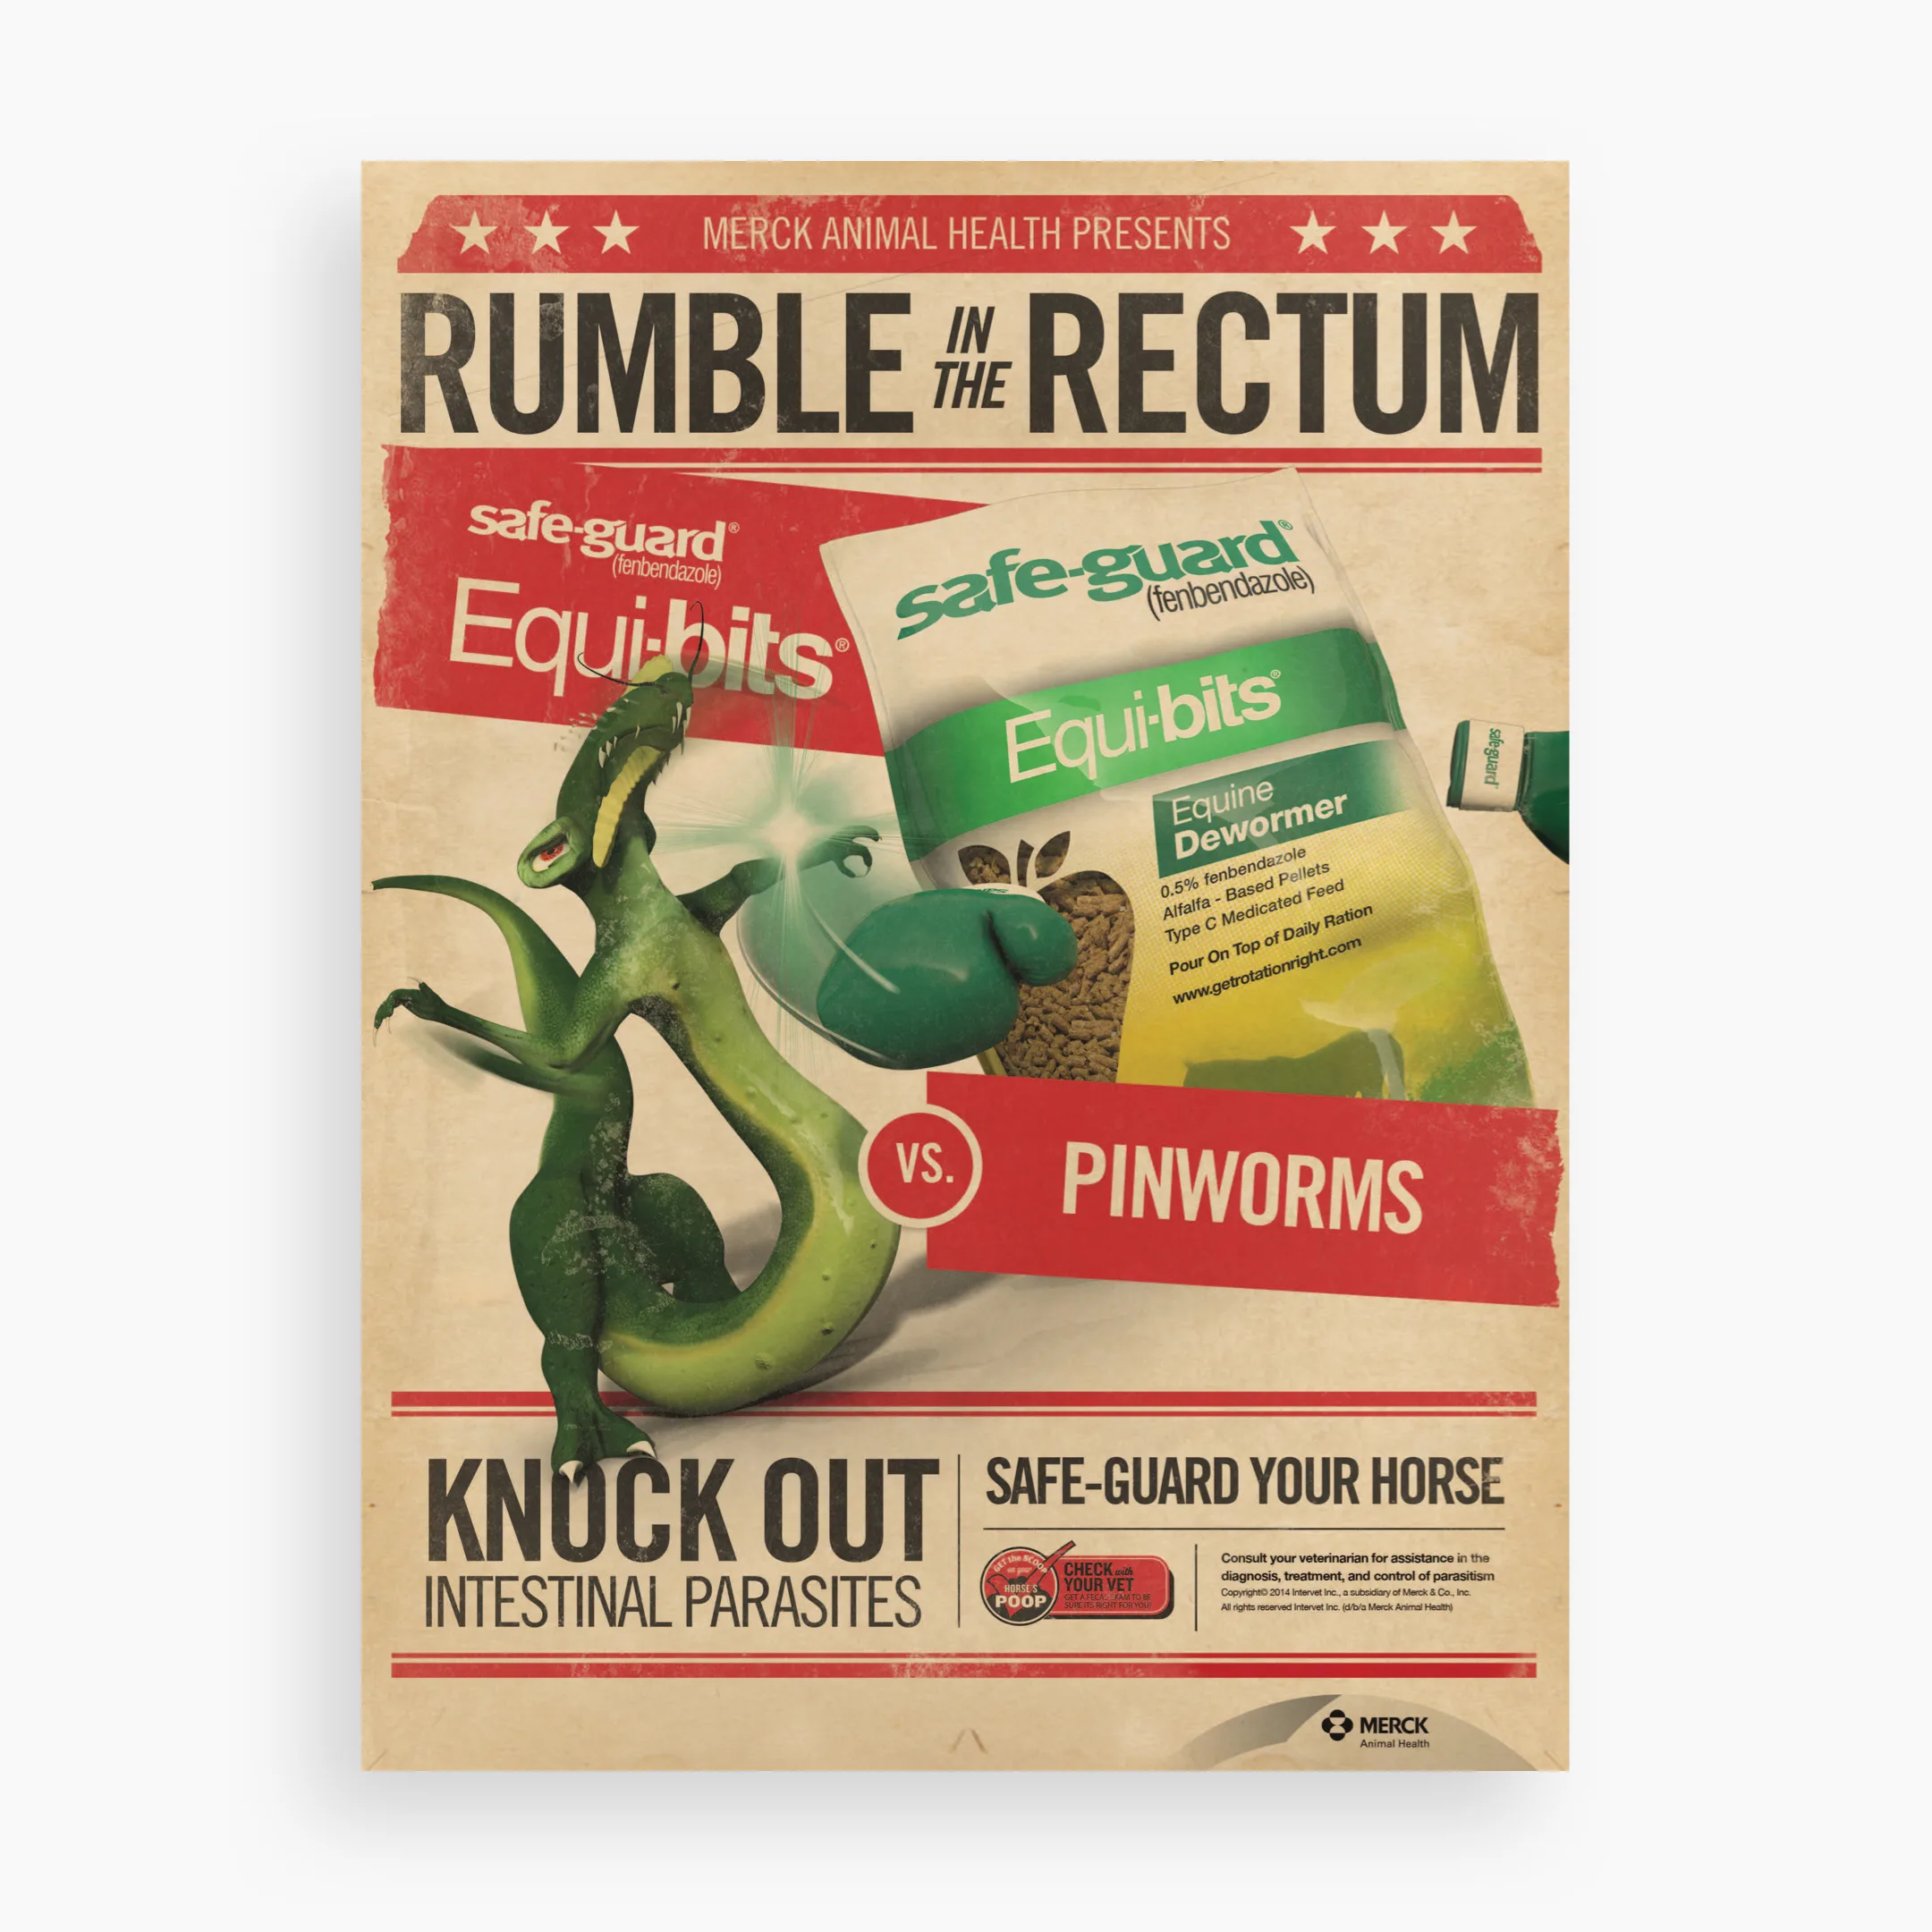 rumble in the rectum safe-guard poster